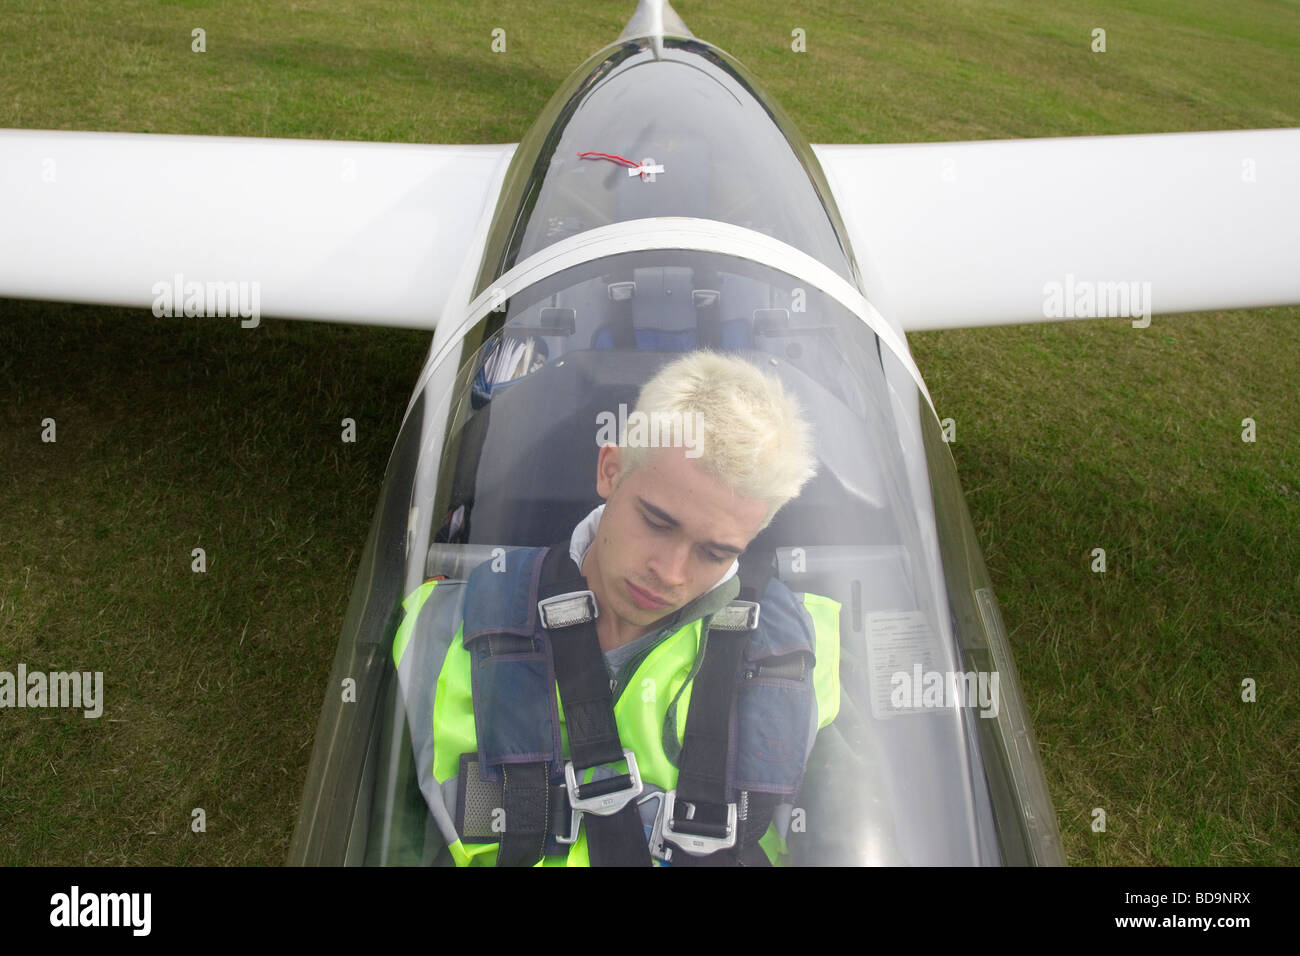 A young teenage pilot with bleach blond hair strapped into the cockpit of a glider anxiously awaiting takeoff Stock Photo